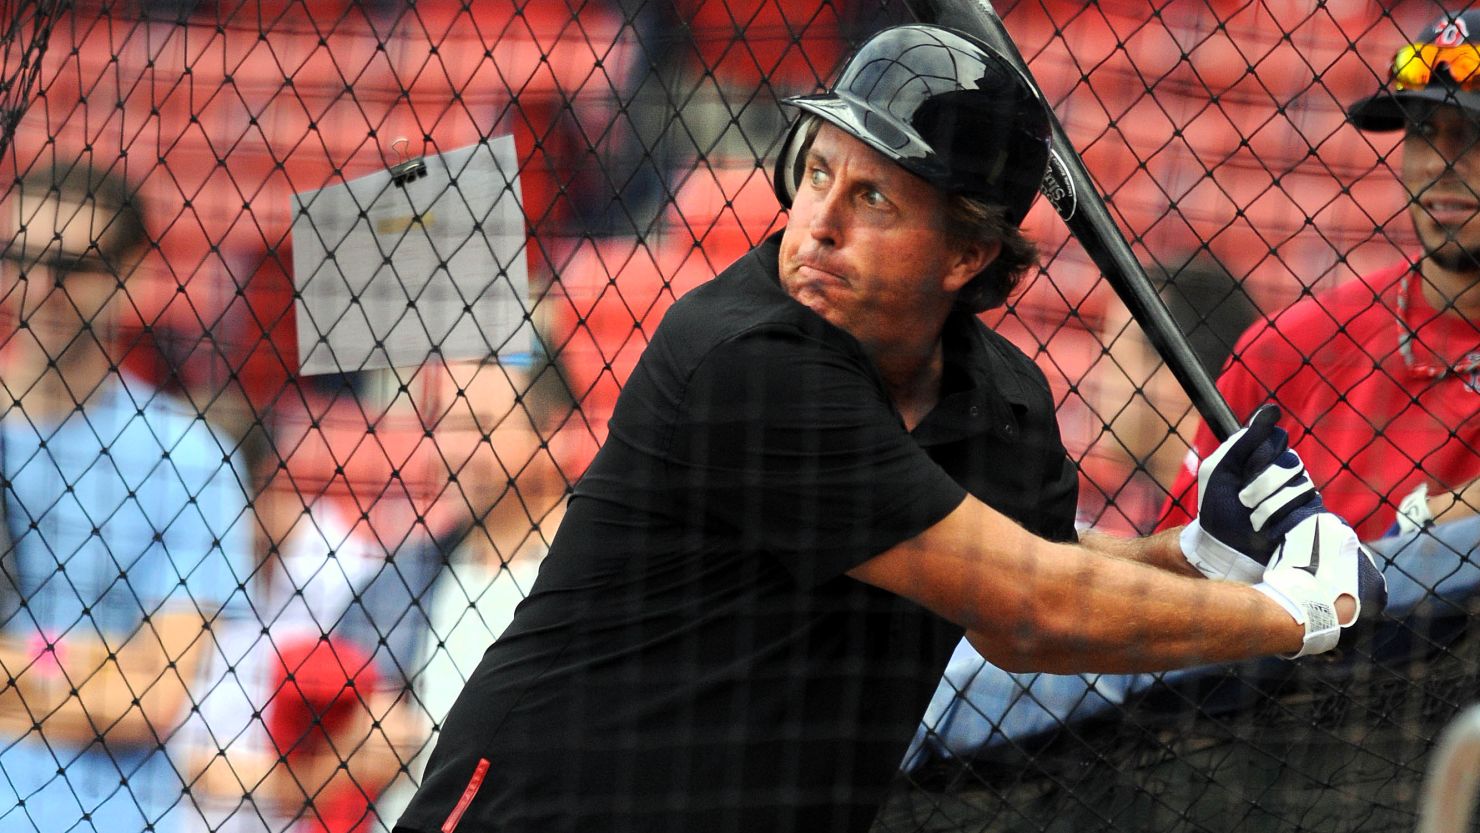 Golf star Phil Mickelson had some batting practice ahead of the Boston Red Sox-New York Yankees game last September.